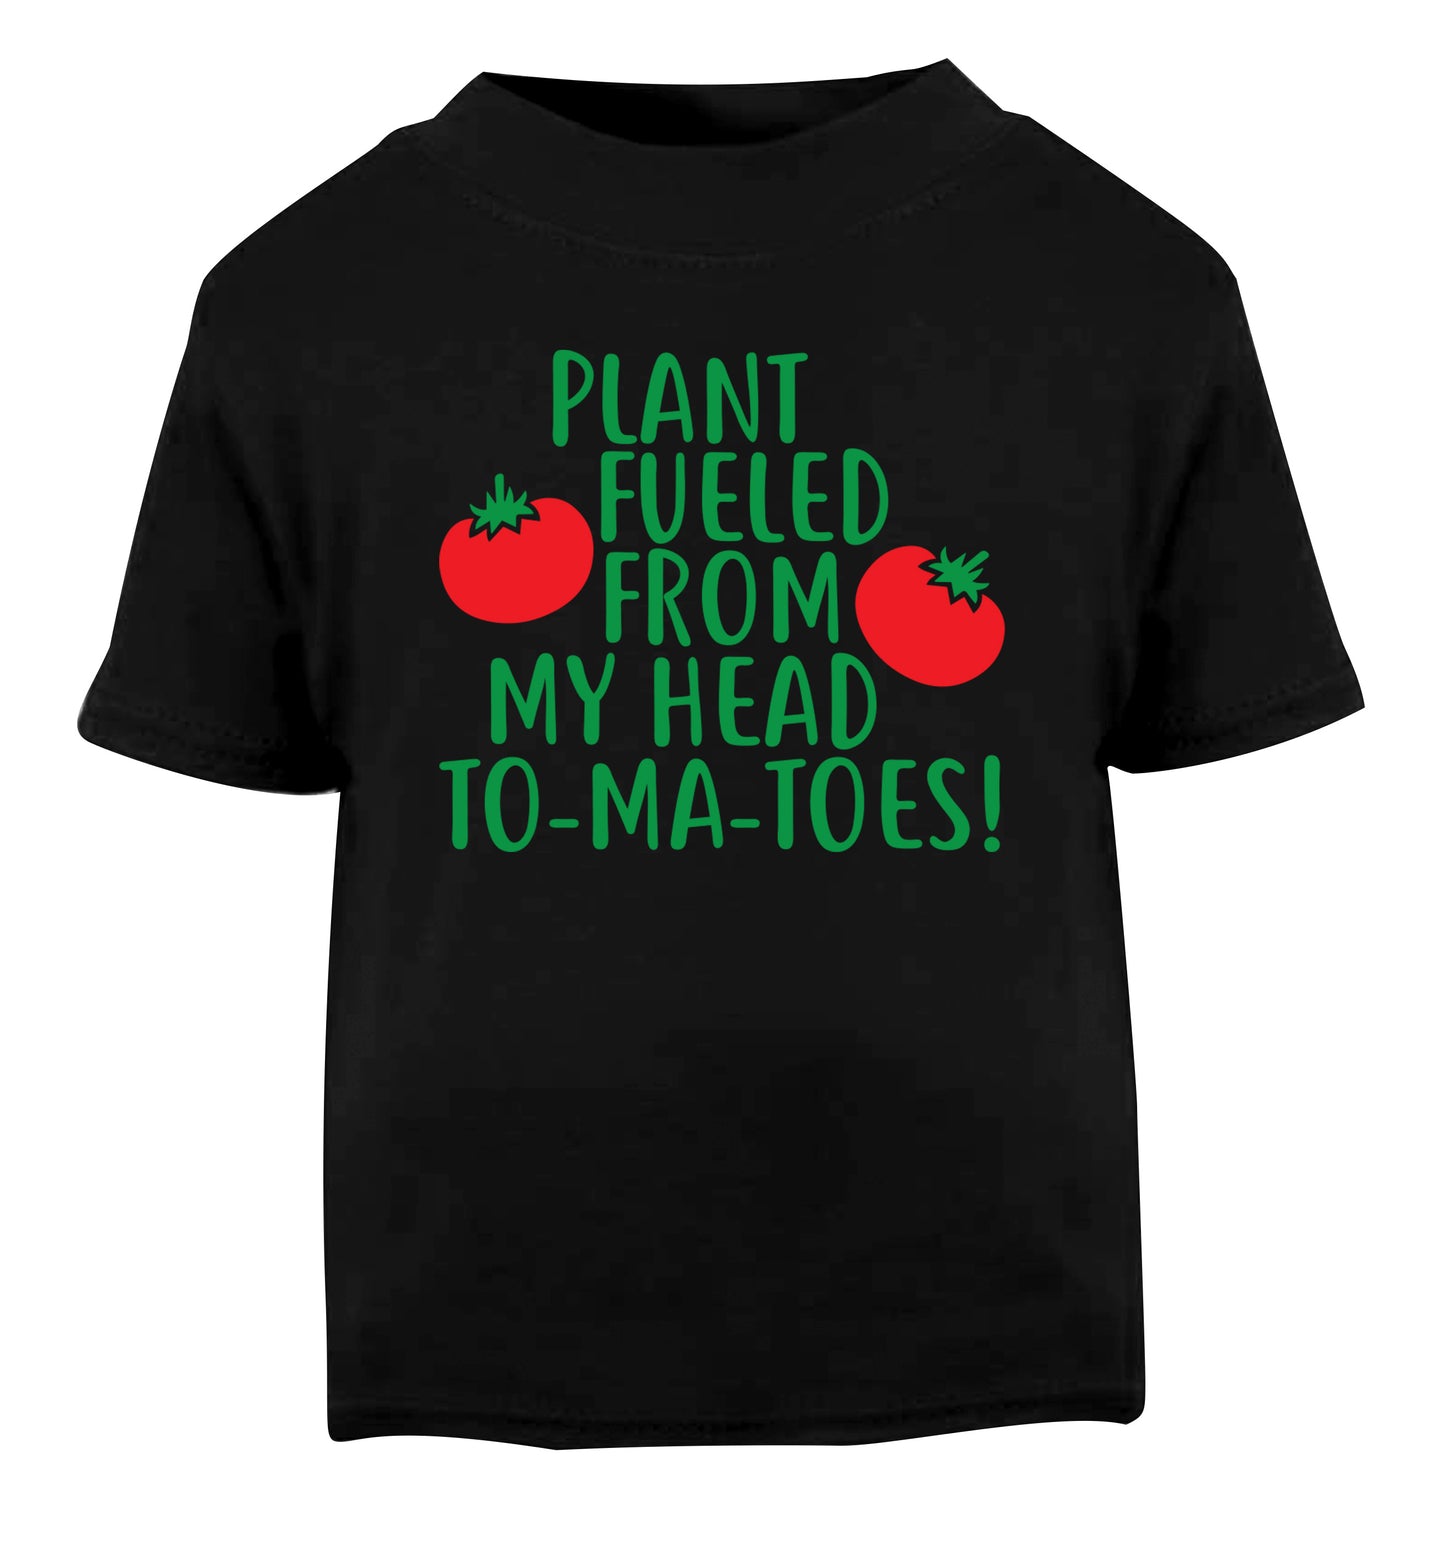 Plant fueled from my head to-ma-toes Black Baby Toddler Tshirt 2 years